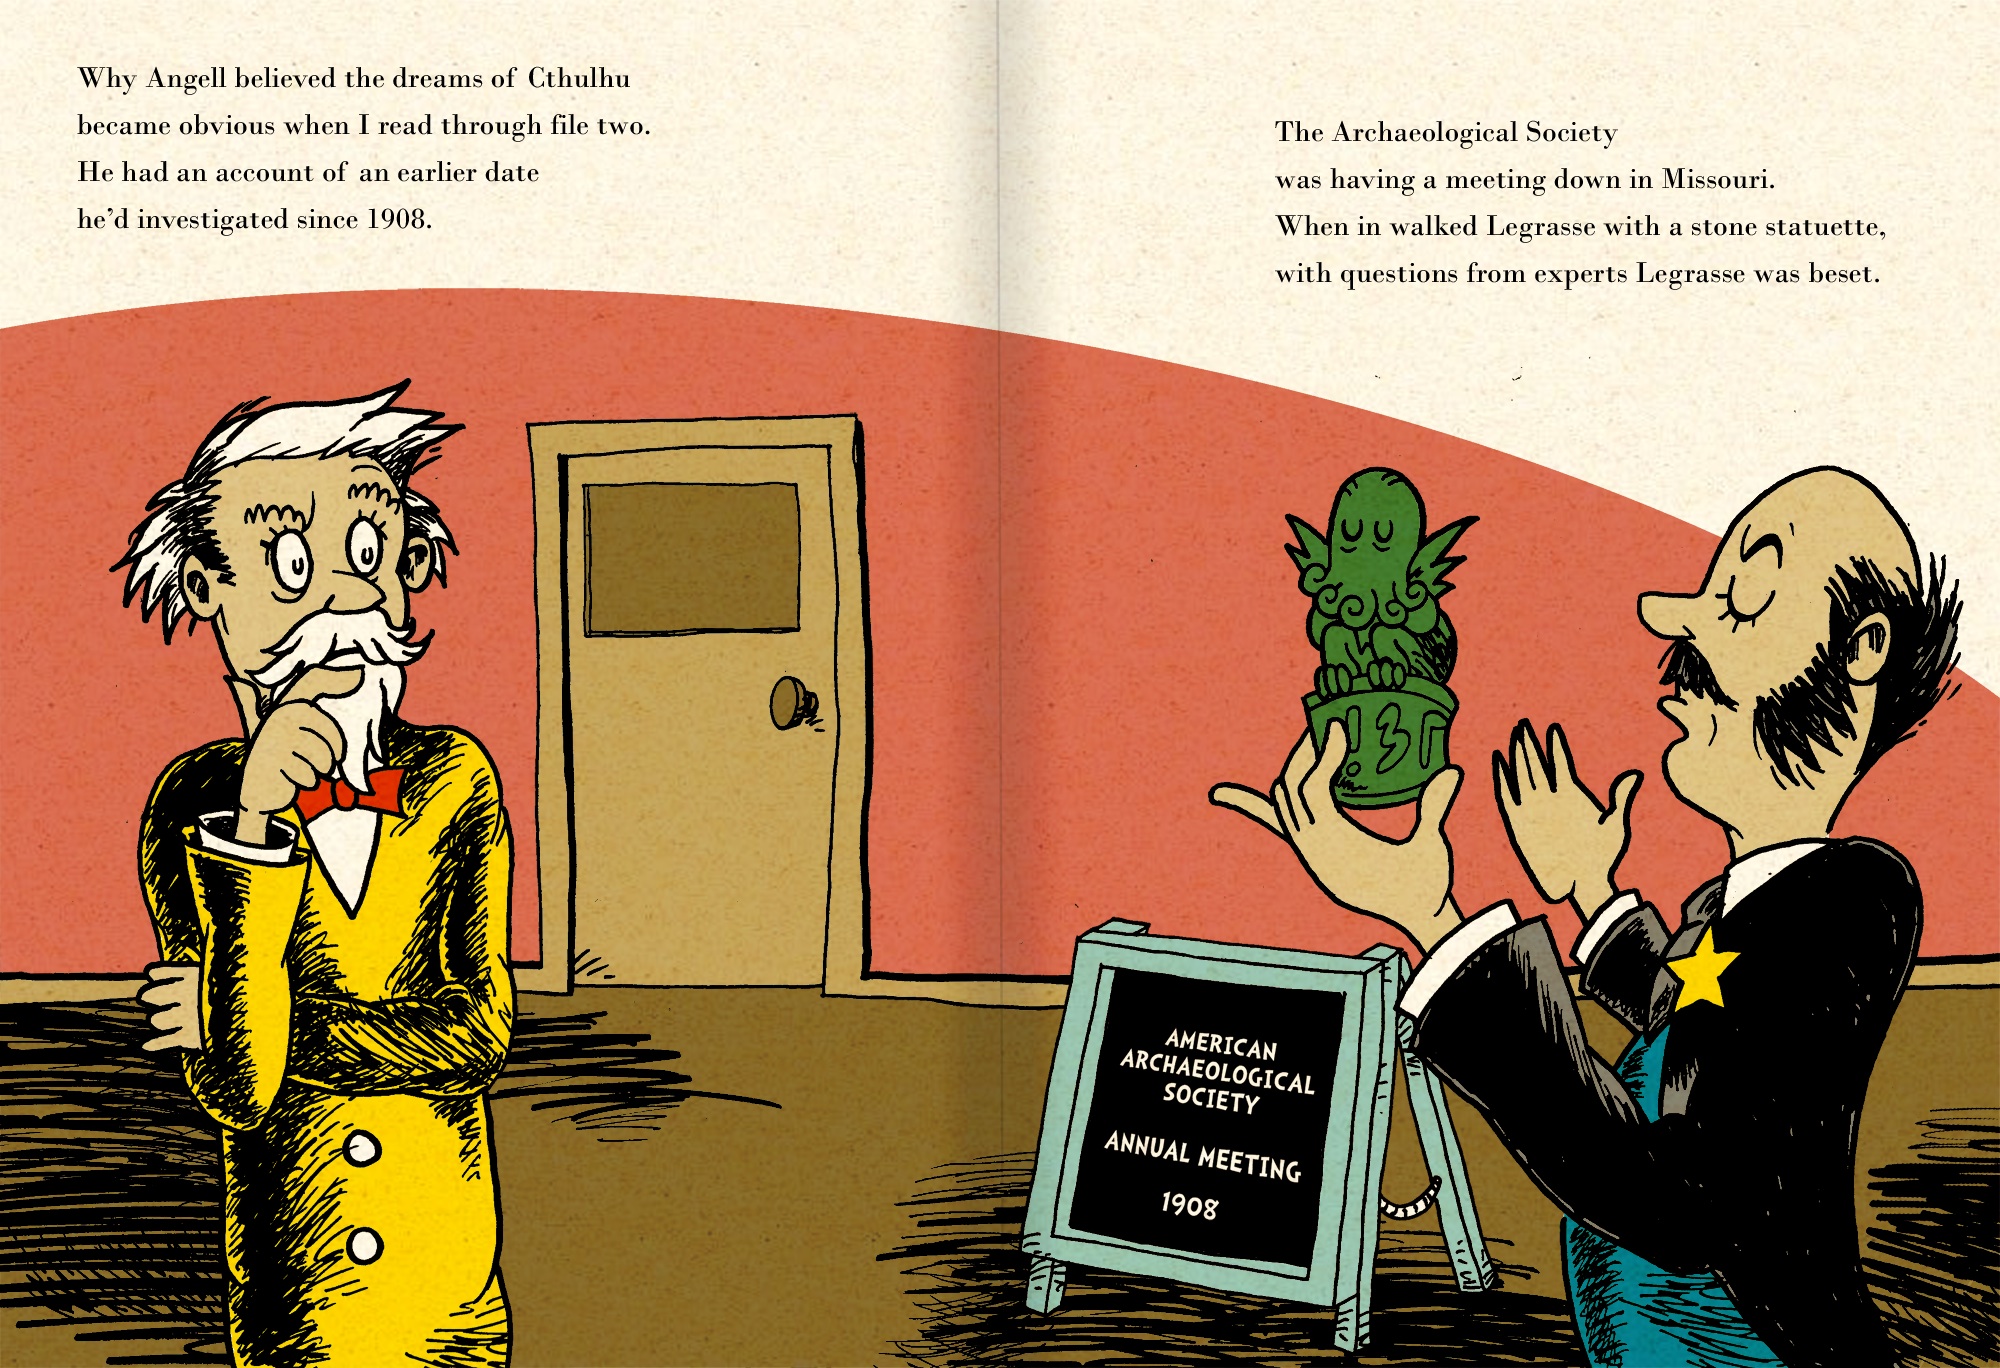 What if Dr. Seuss wrote The Call of Cthulhu?